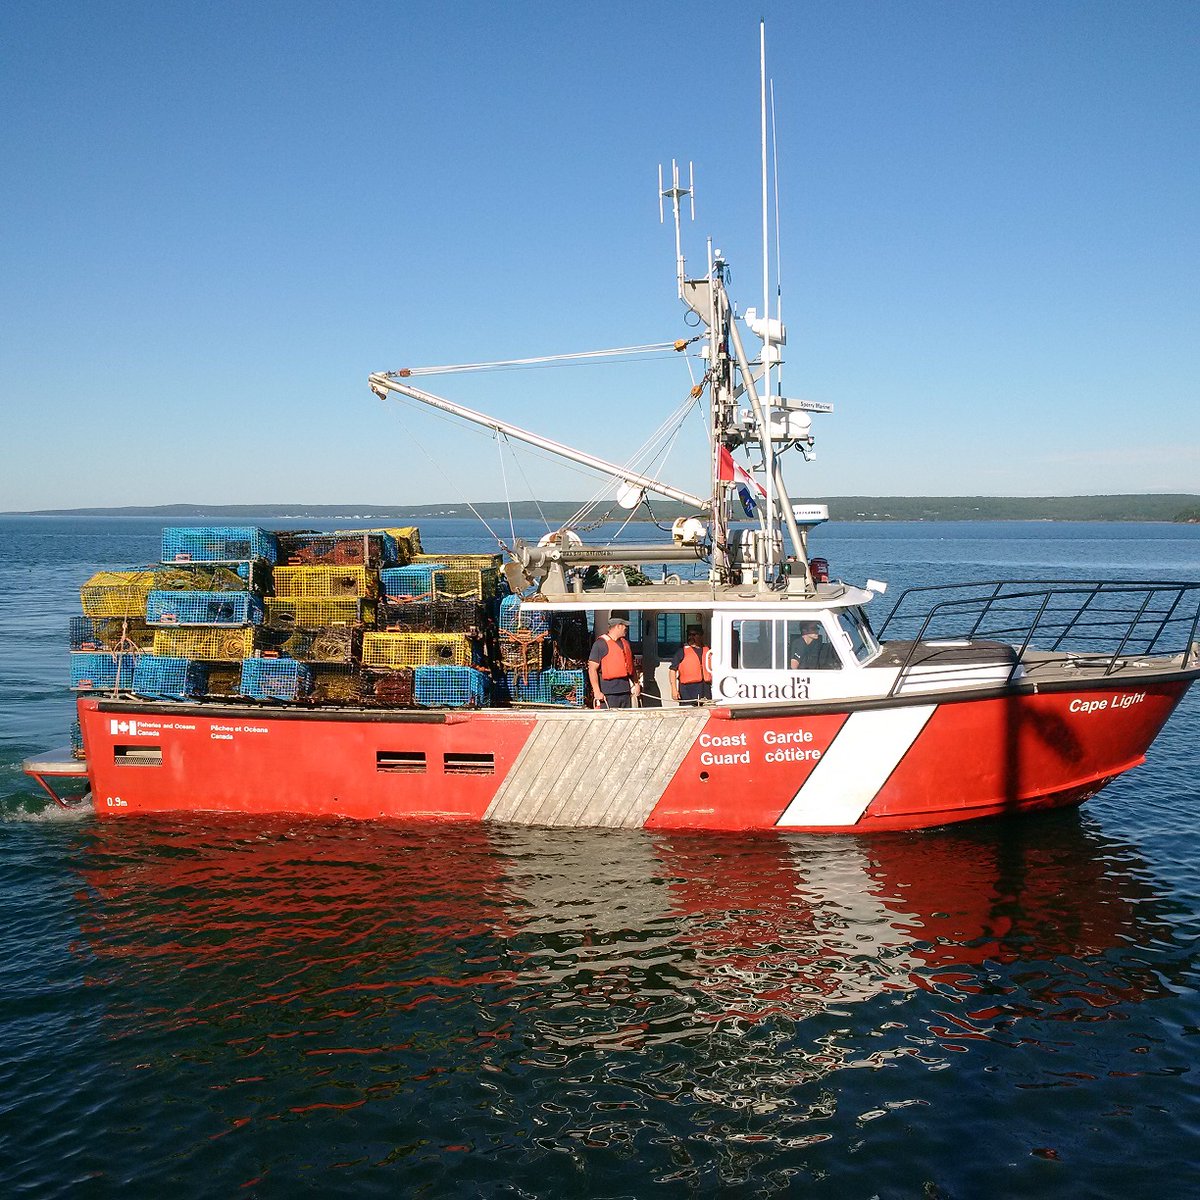 The Department of Fisheries and oceans has seized 172 lobster traps in Nova Scotia. 